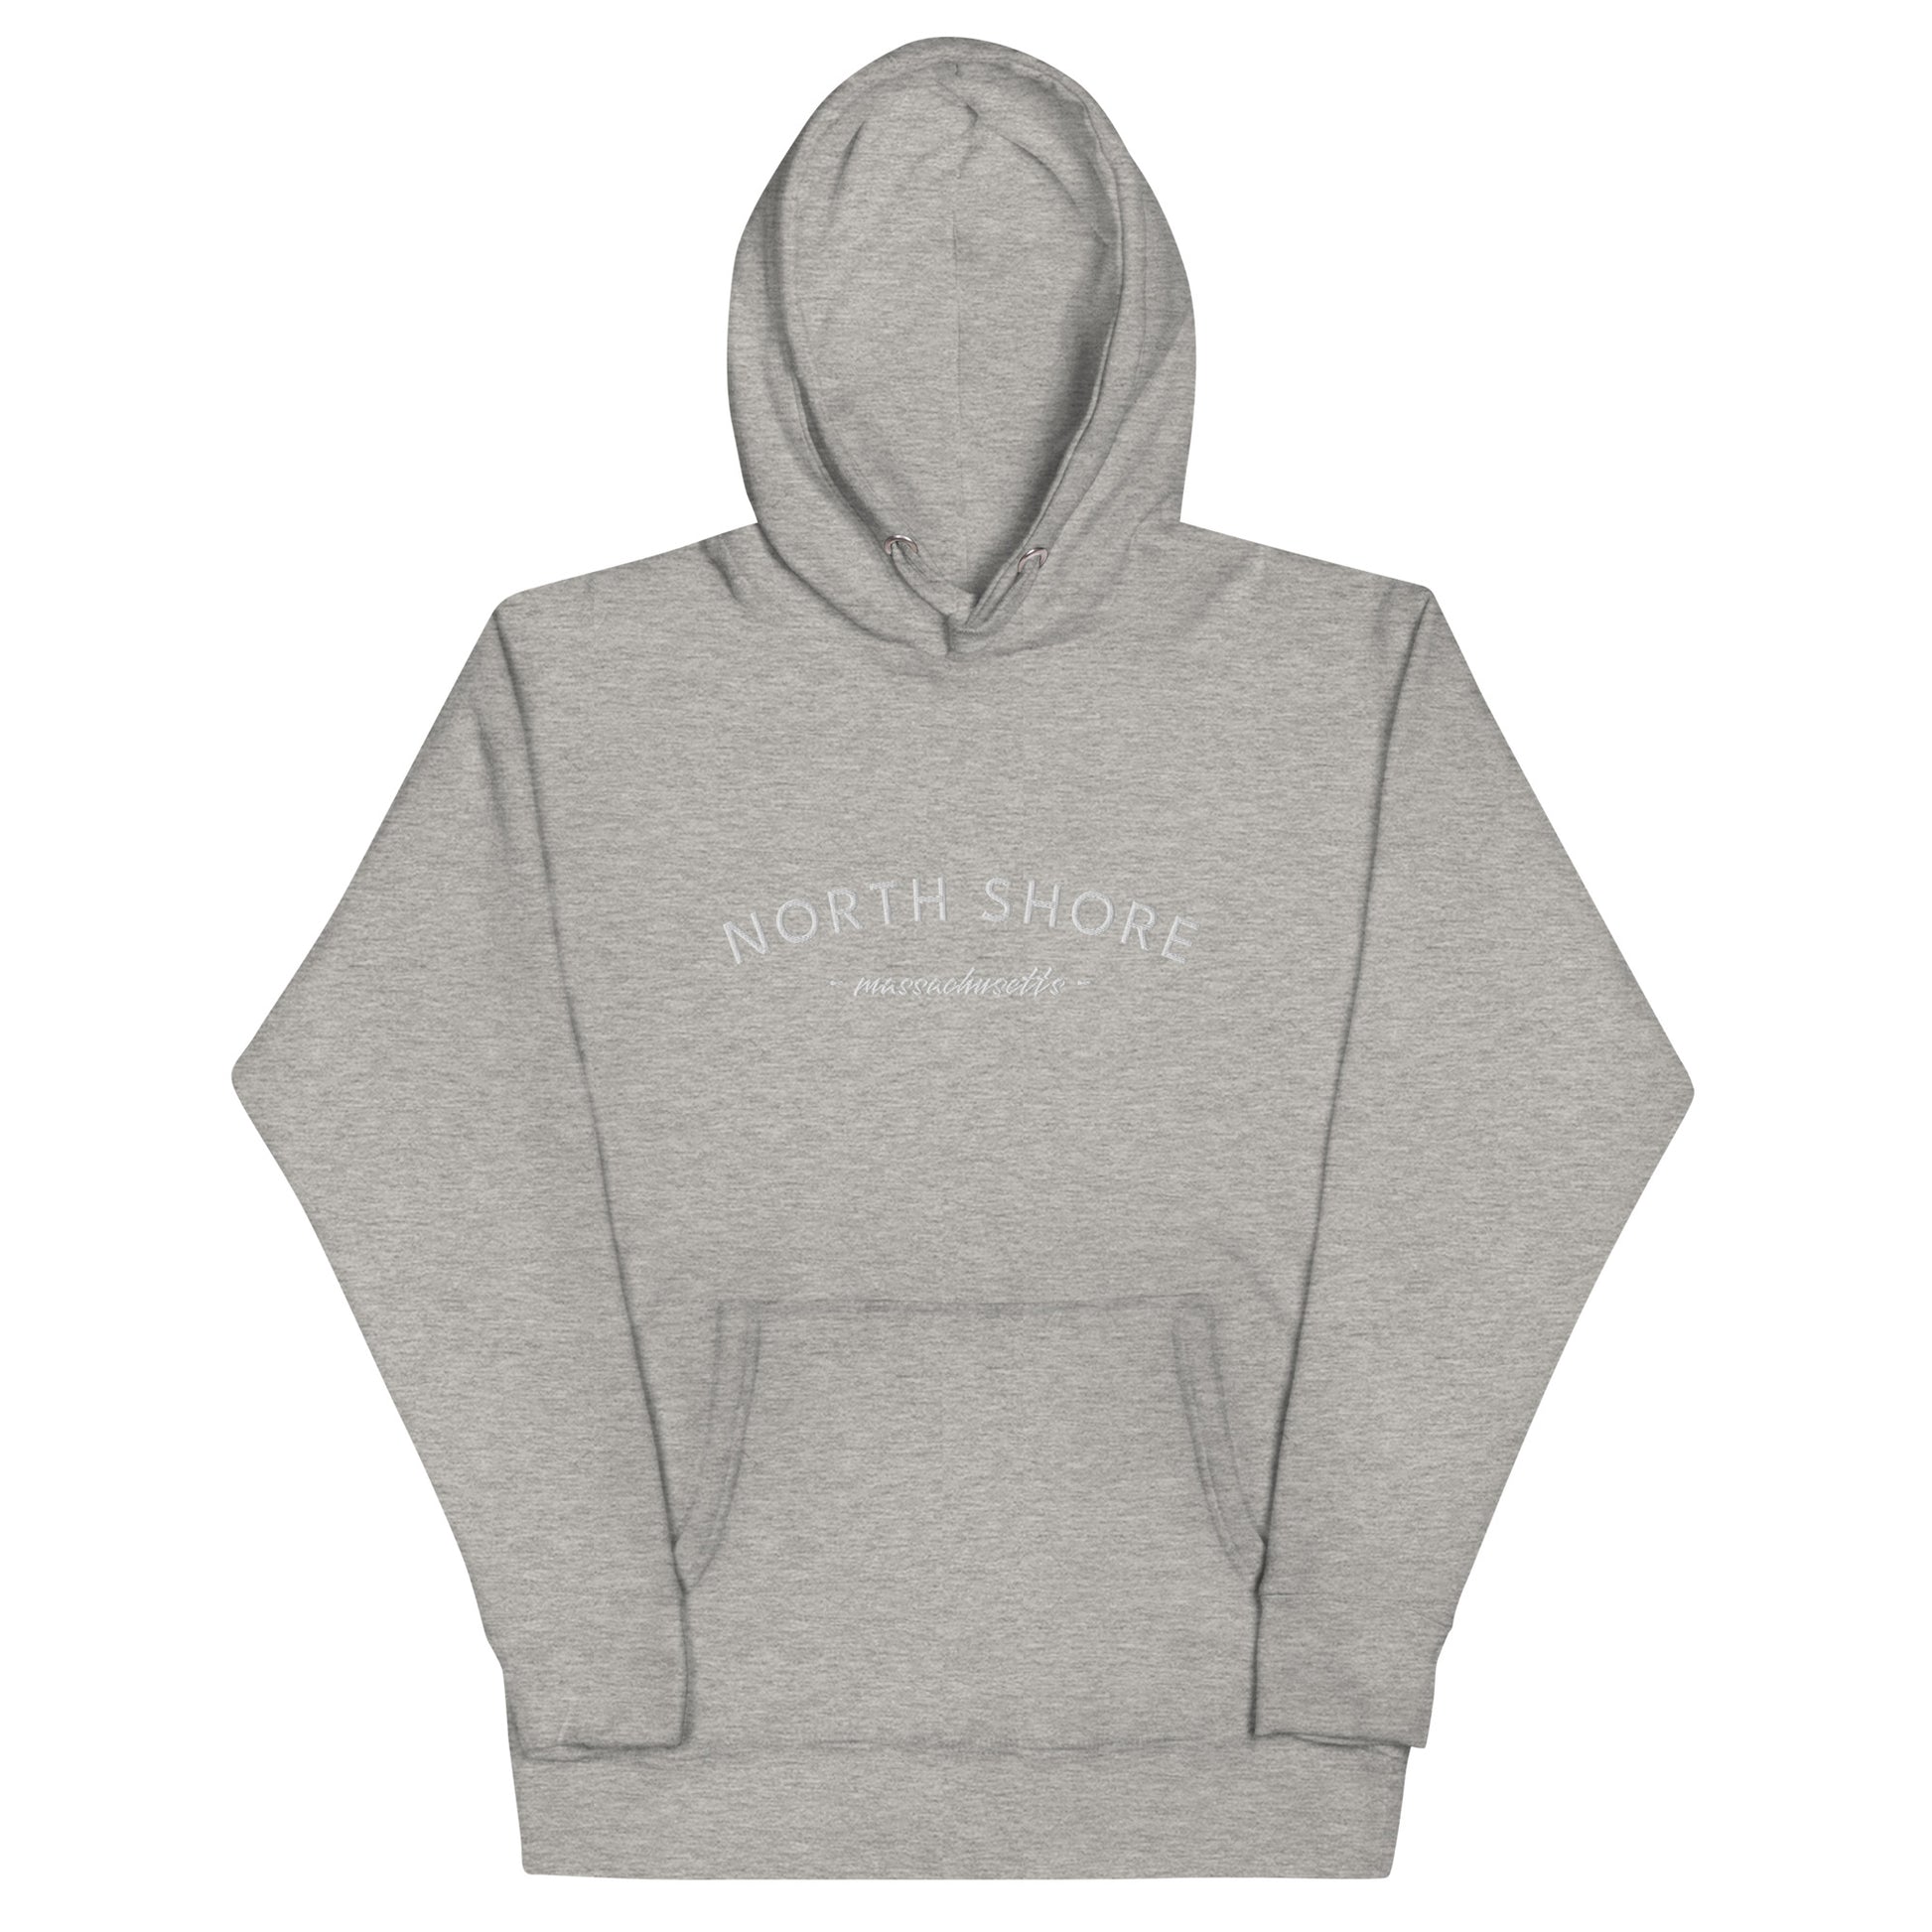 grey hoodie that says "north shore massachusetts" in white lettering